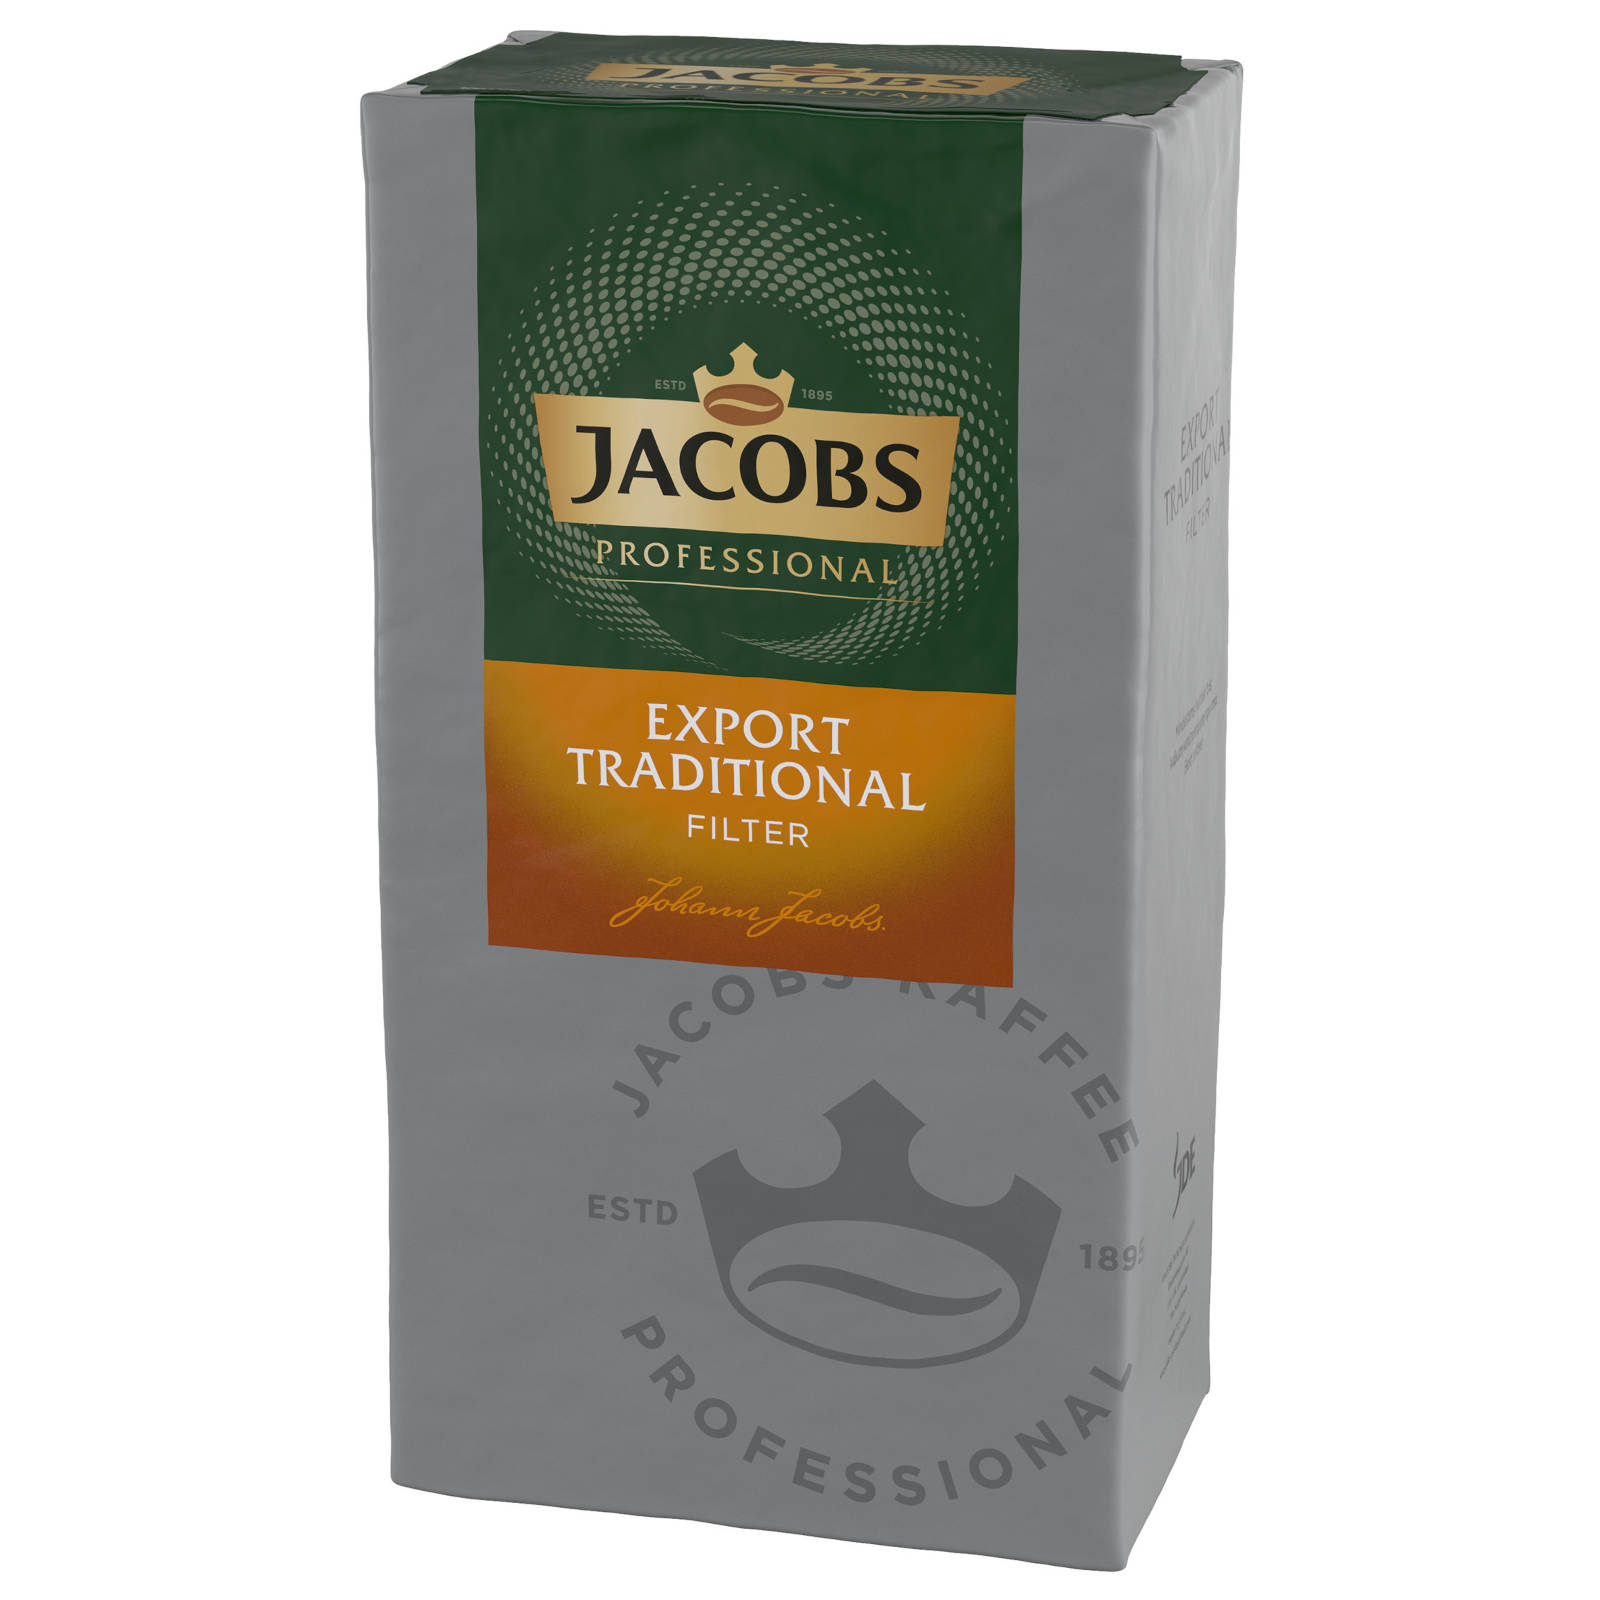 g Press) Filterkaffee JACOBS Export Professional French (Filter, Traditional 12x500